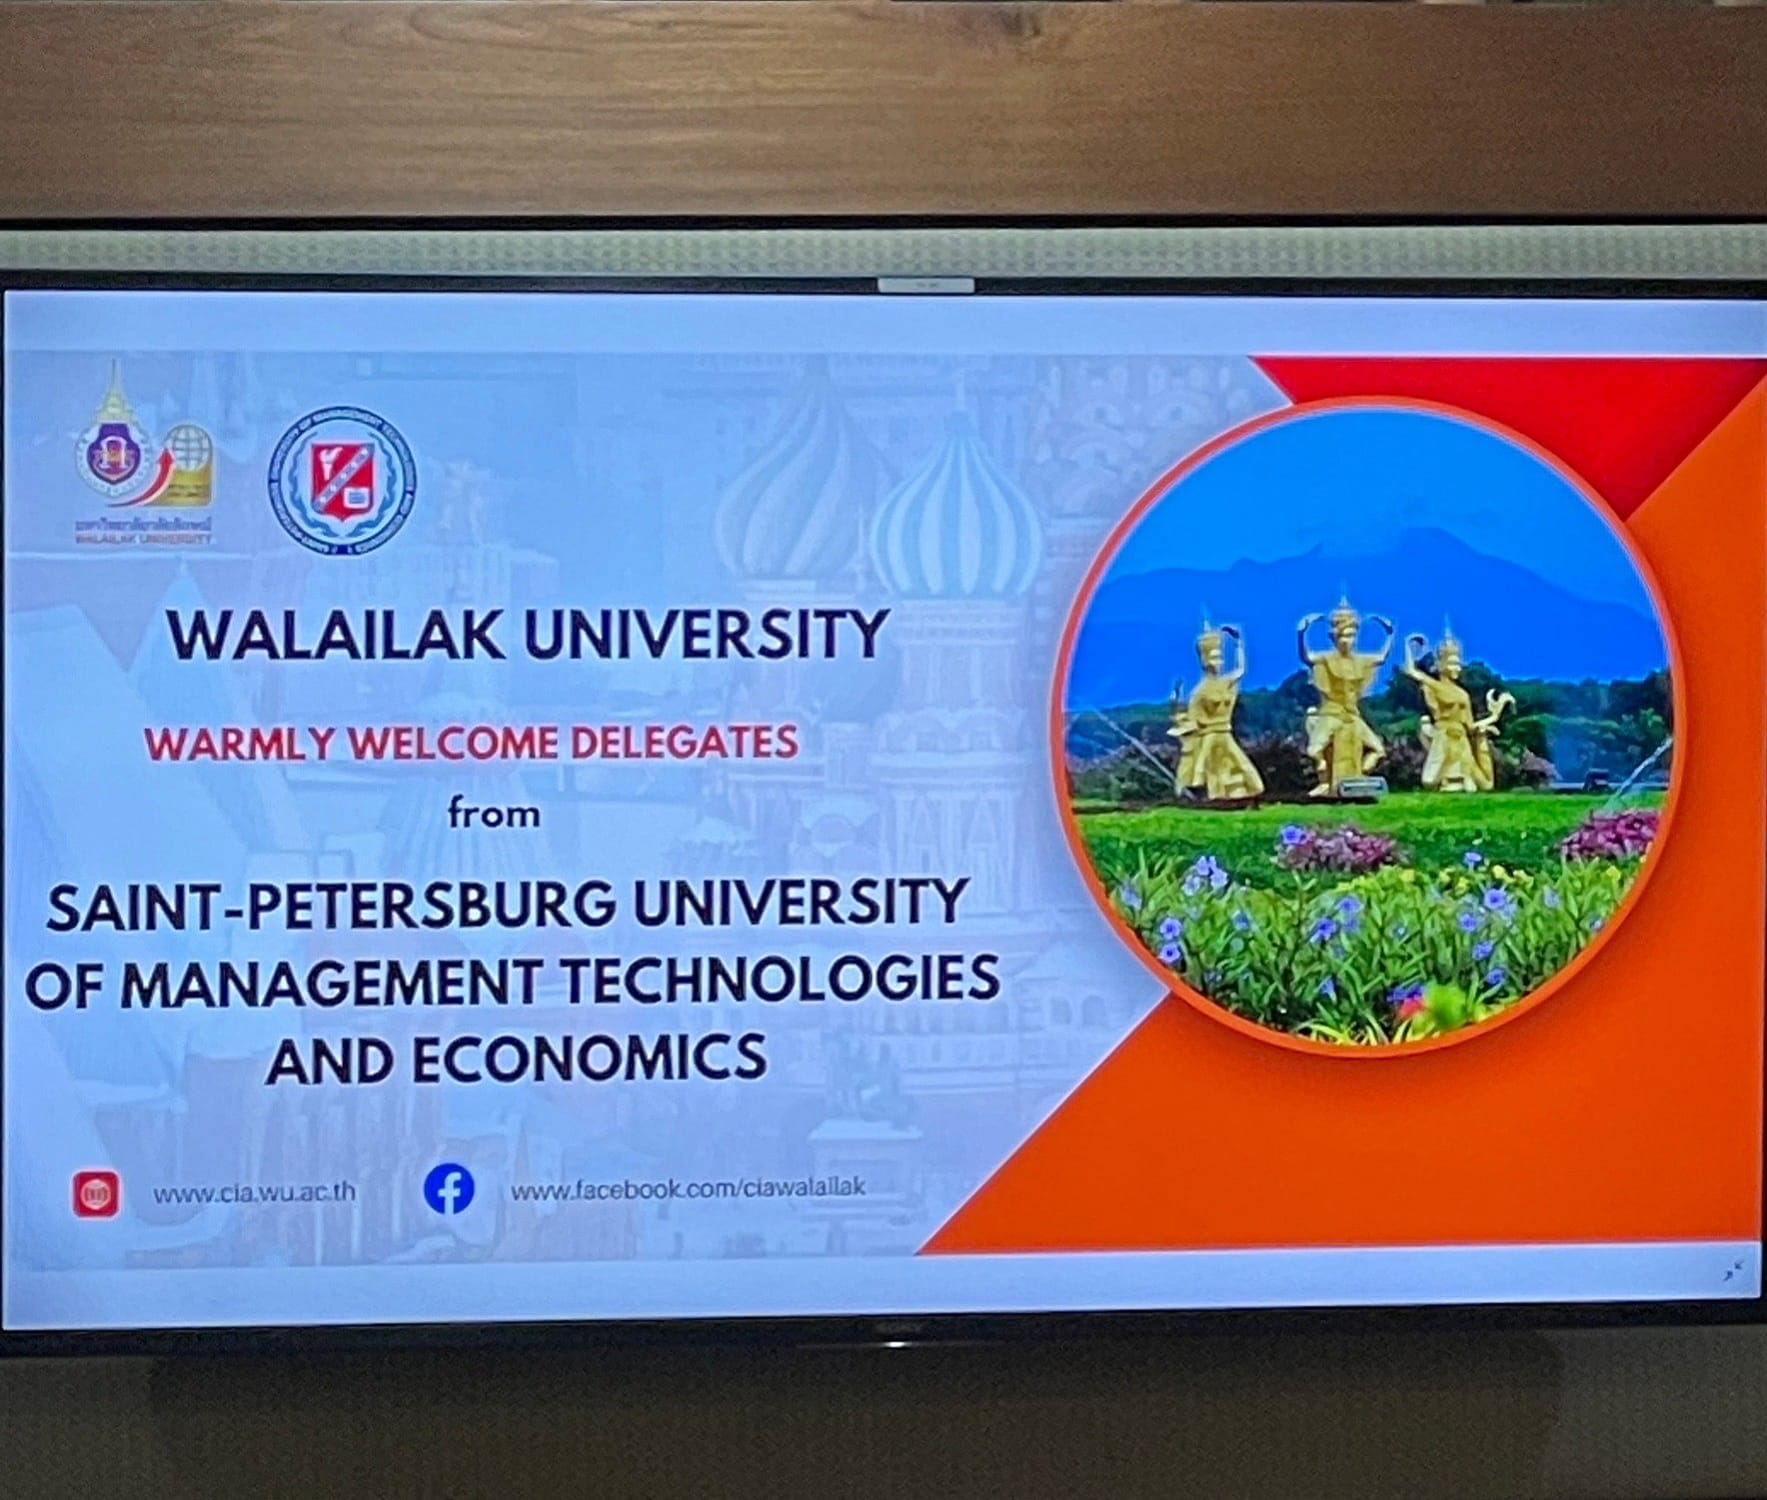 Walailak University in Thailand welcomed Rector and Team from Saint-Petersburg University of Management Technologies and Economics (UMTE)